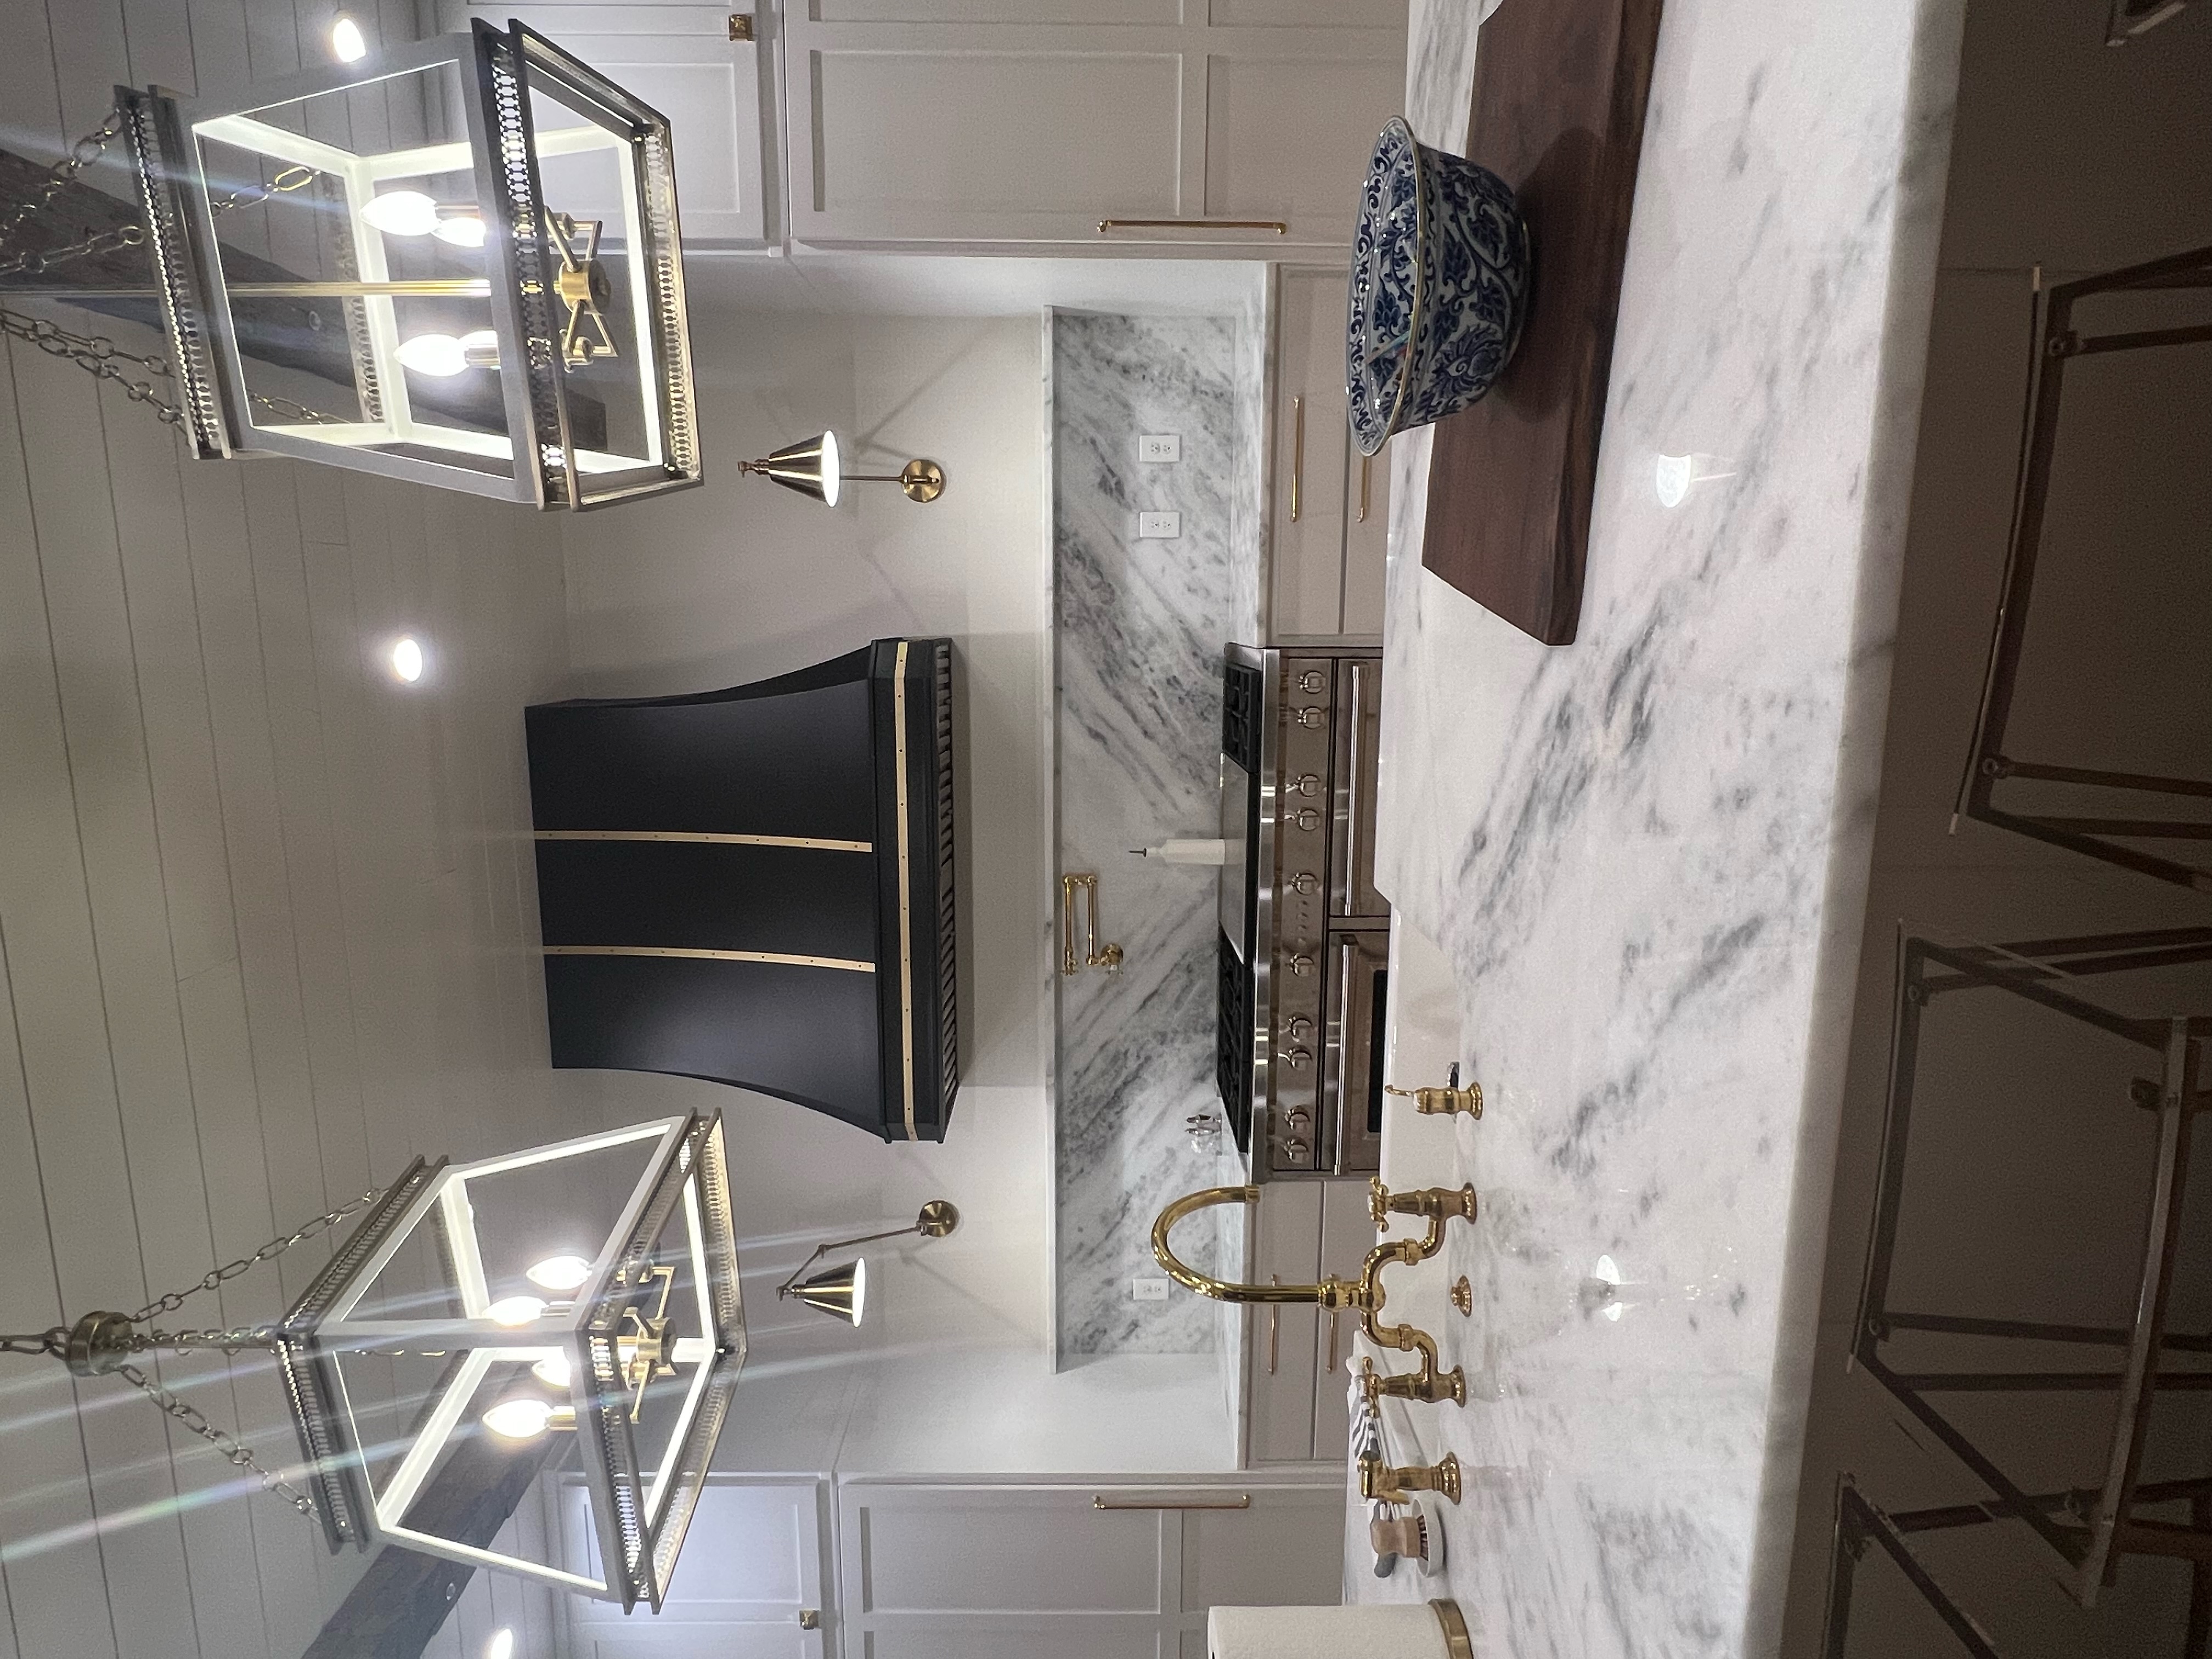 Stunning coastal kitchen with white kitchen cabinets, marble kitchen countertops, beautiful marble backsplash complemented by a stylish range hood